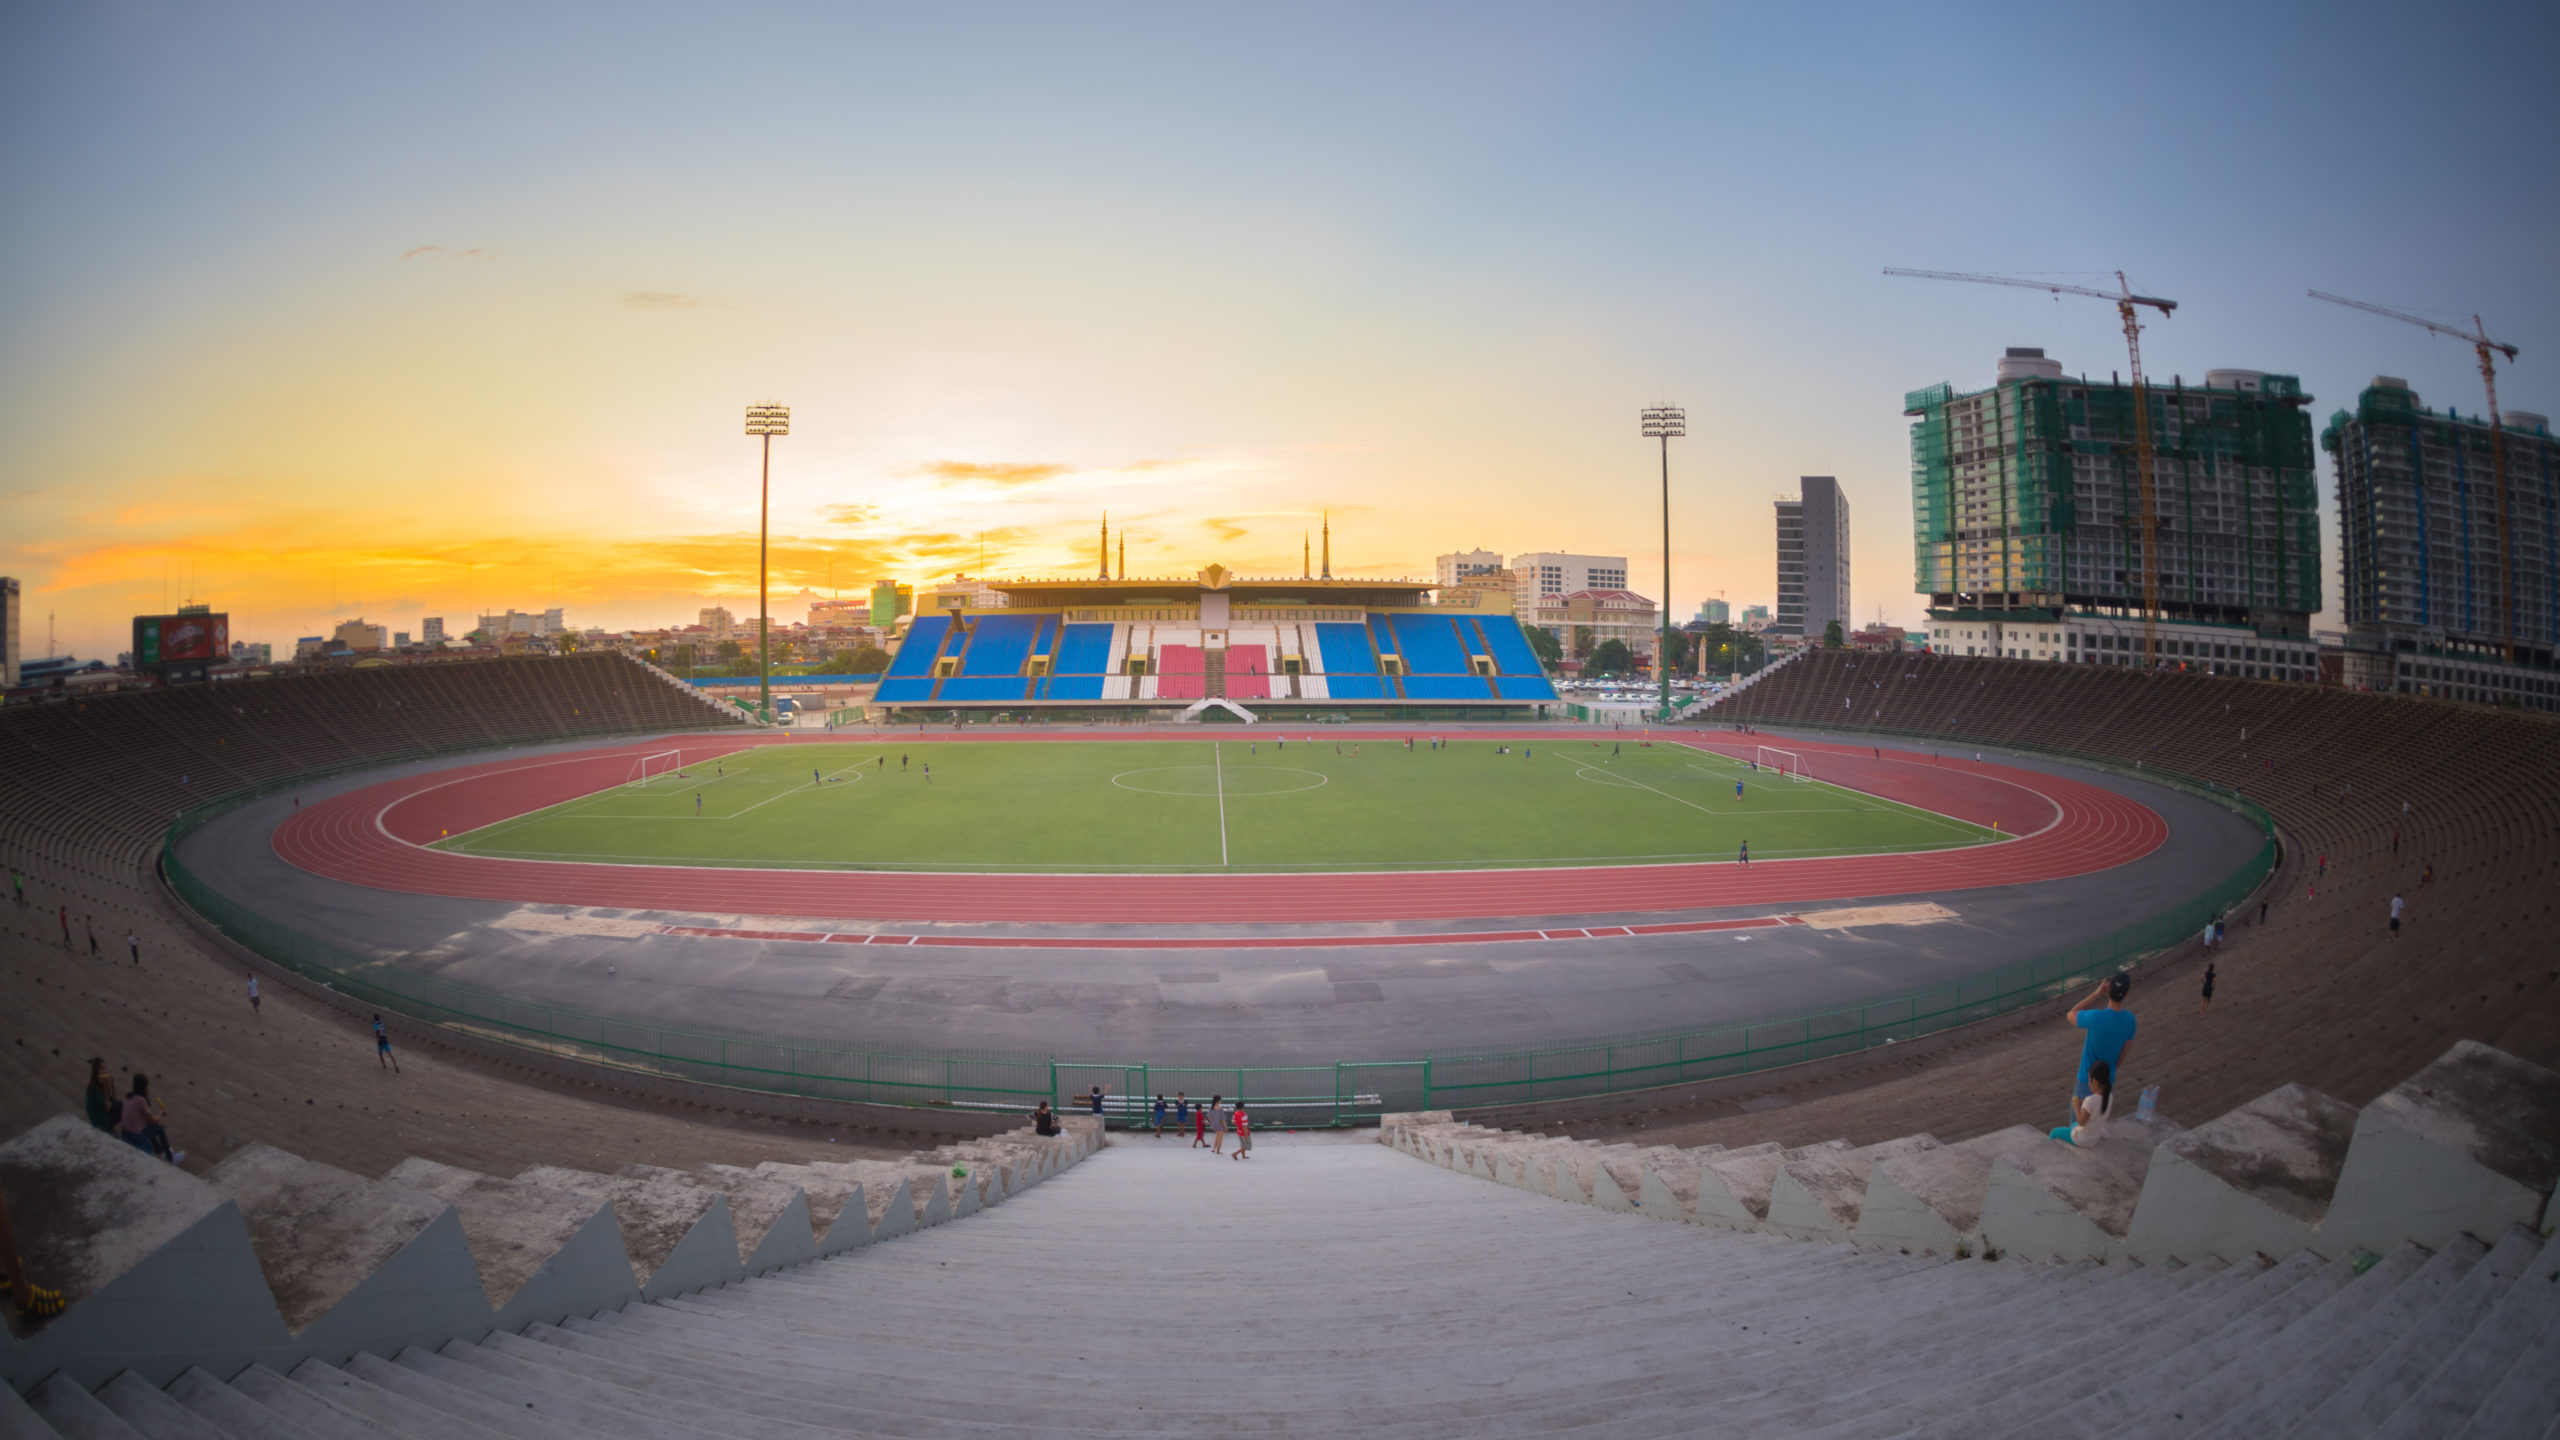 Finding Sports Phnom Penh | Ex-pats & Backpacker Guide